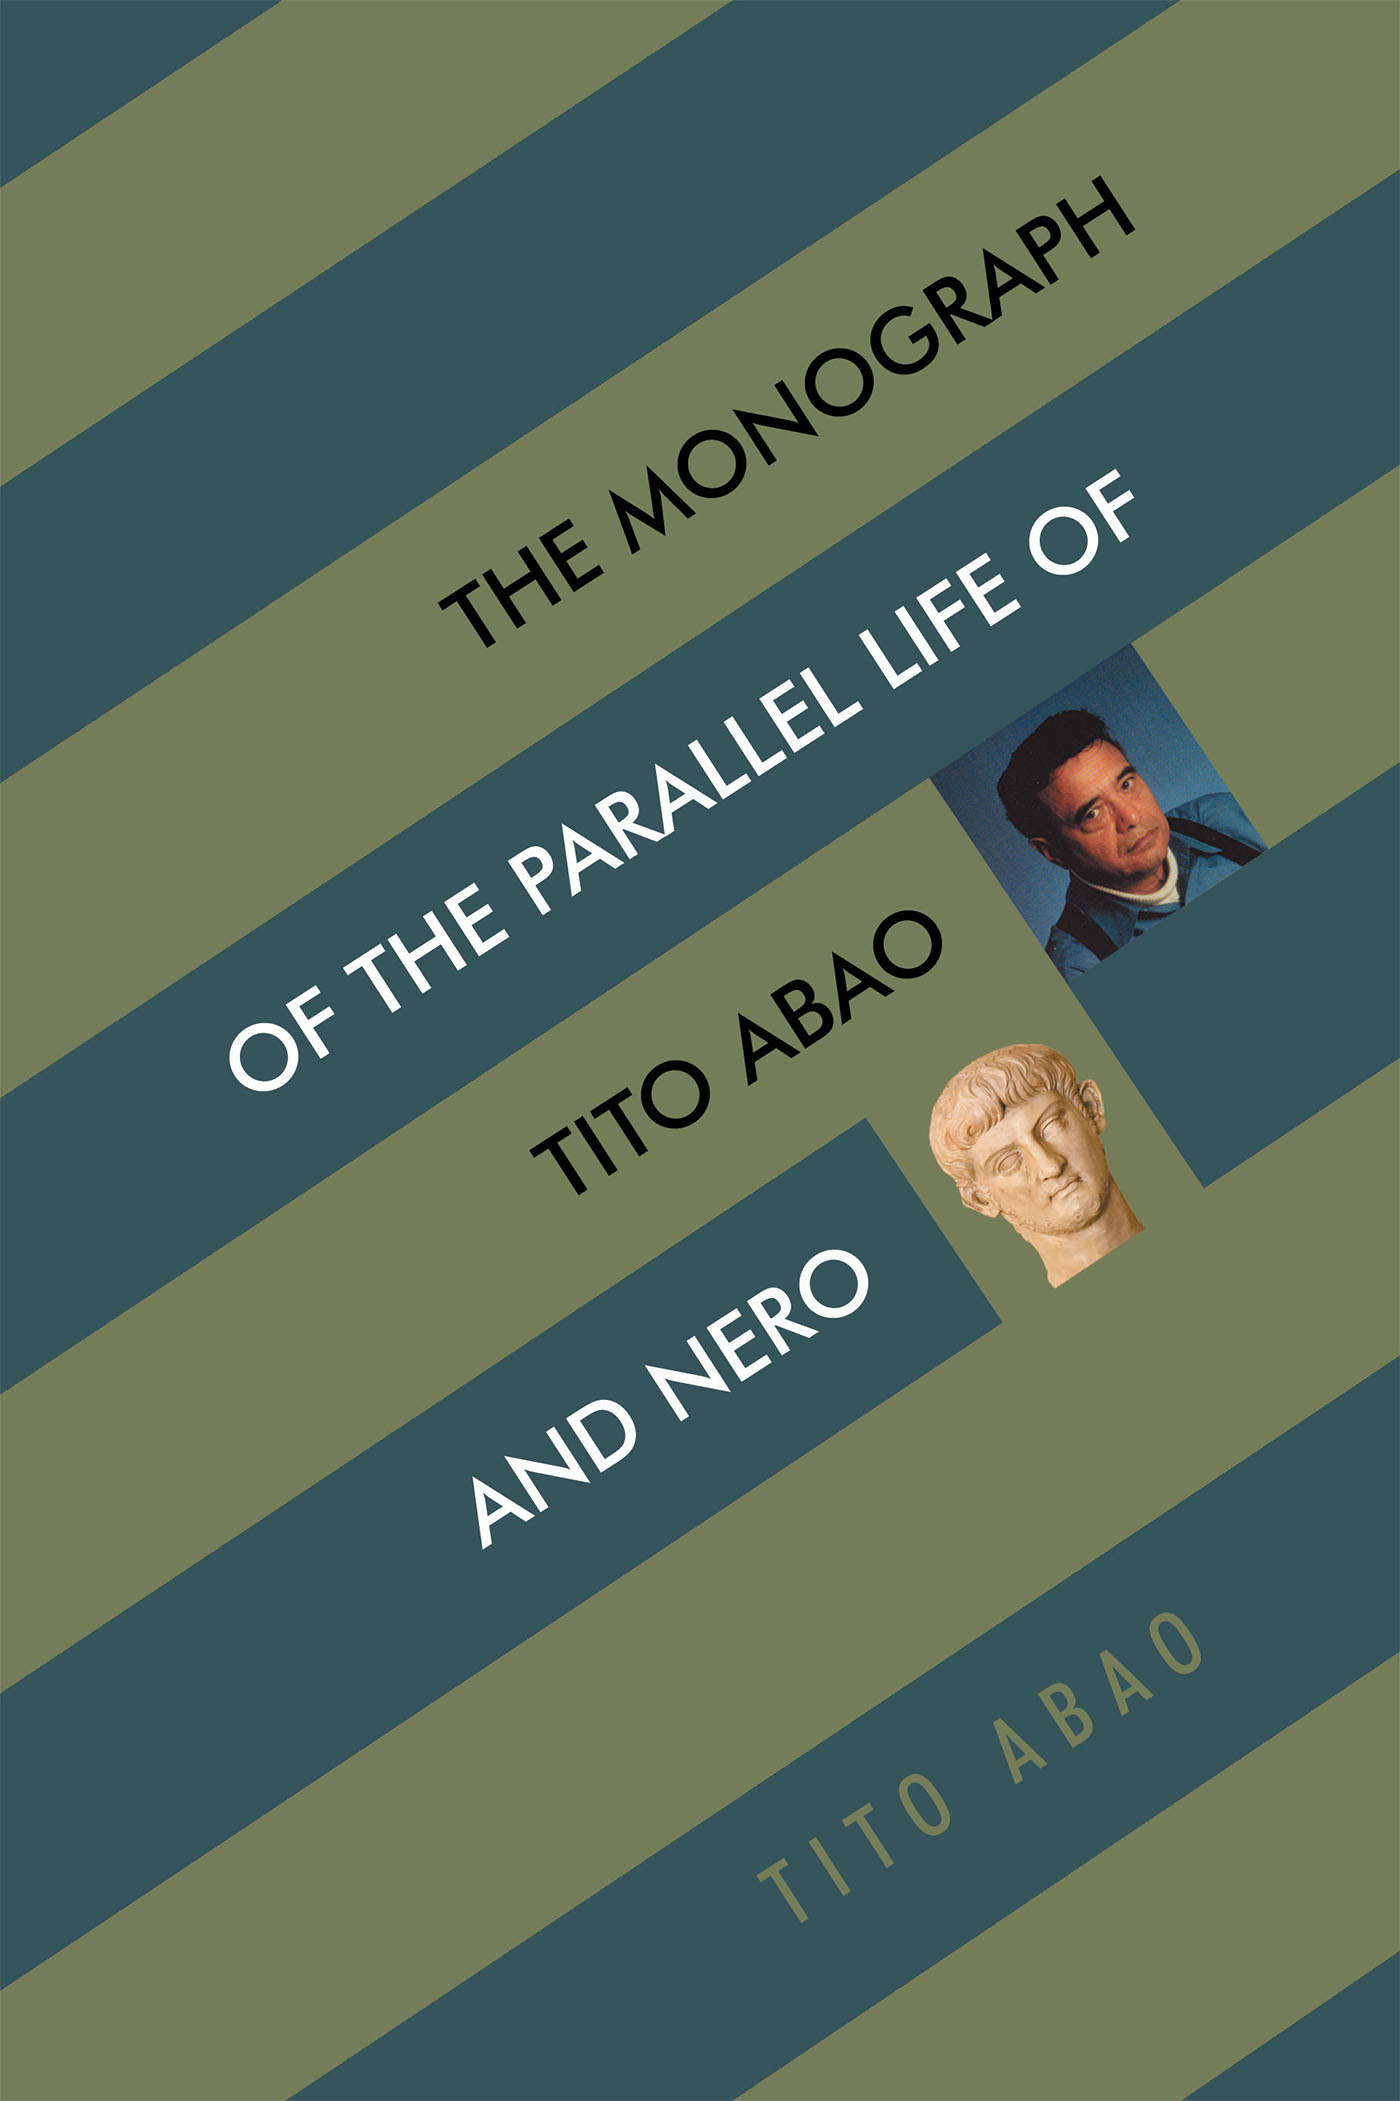 The Monograph of the Parallel Life of Tito Abao and Nero Cover Image